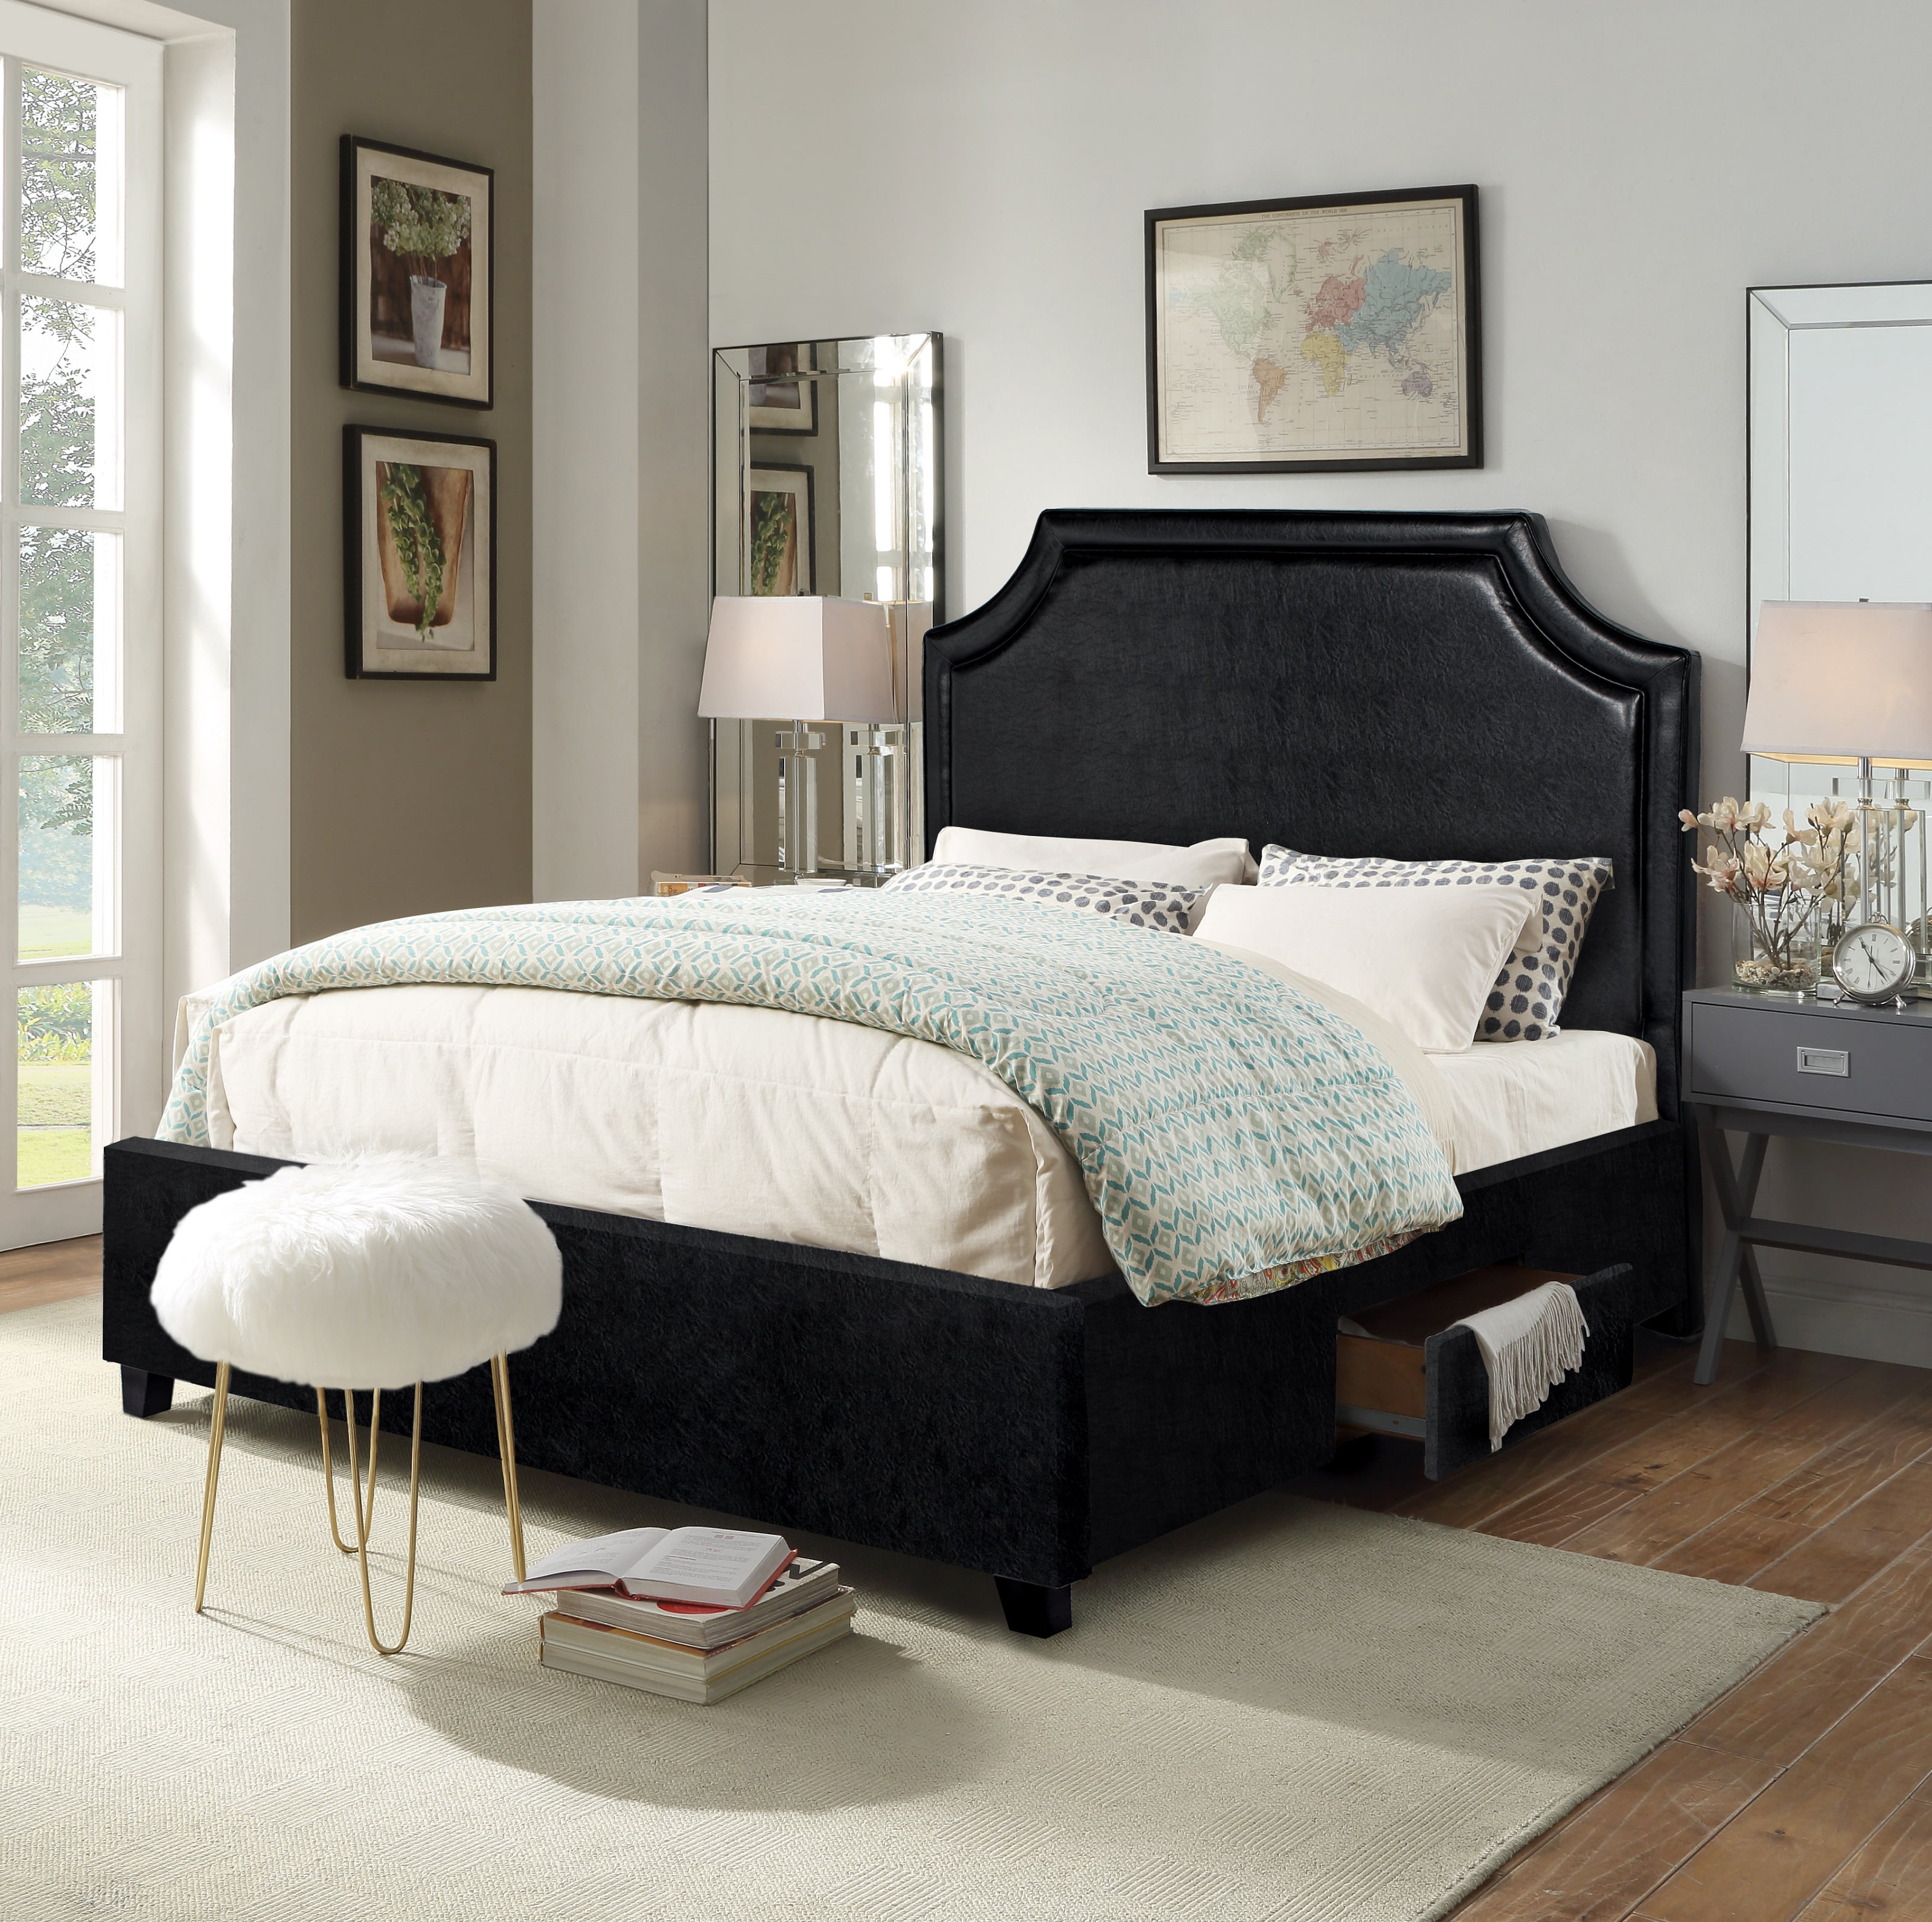 Headboard And Storage Drawers, Queen Bed Frame With Shelves In Headboard